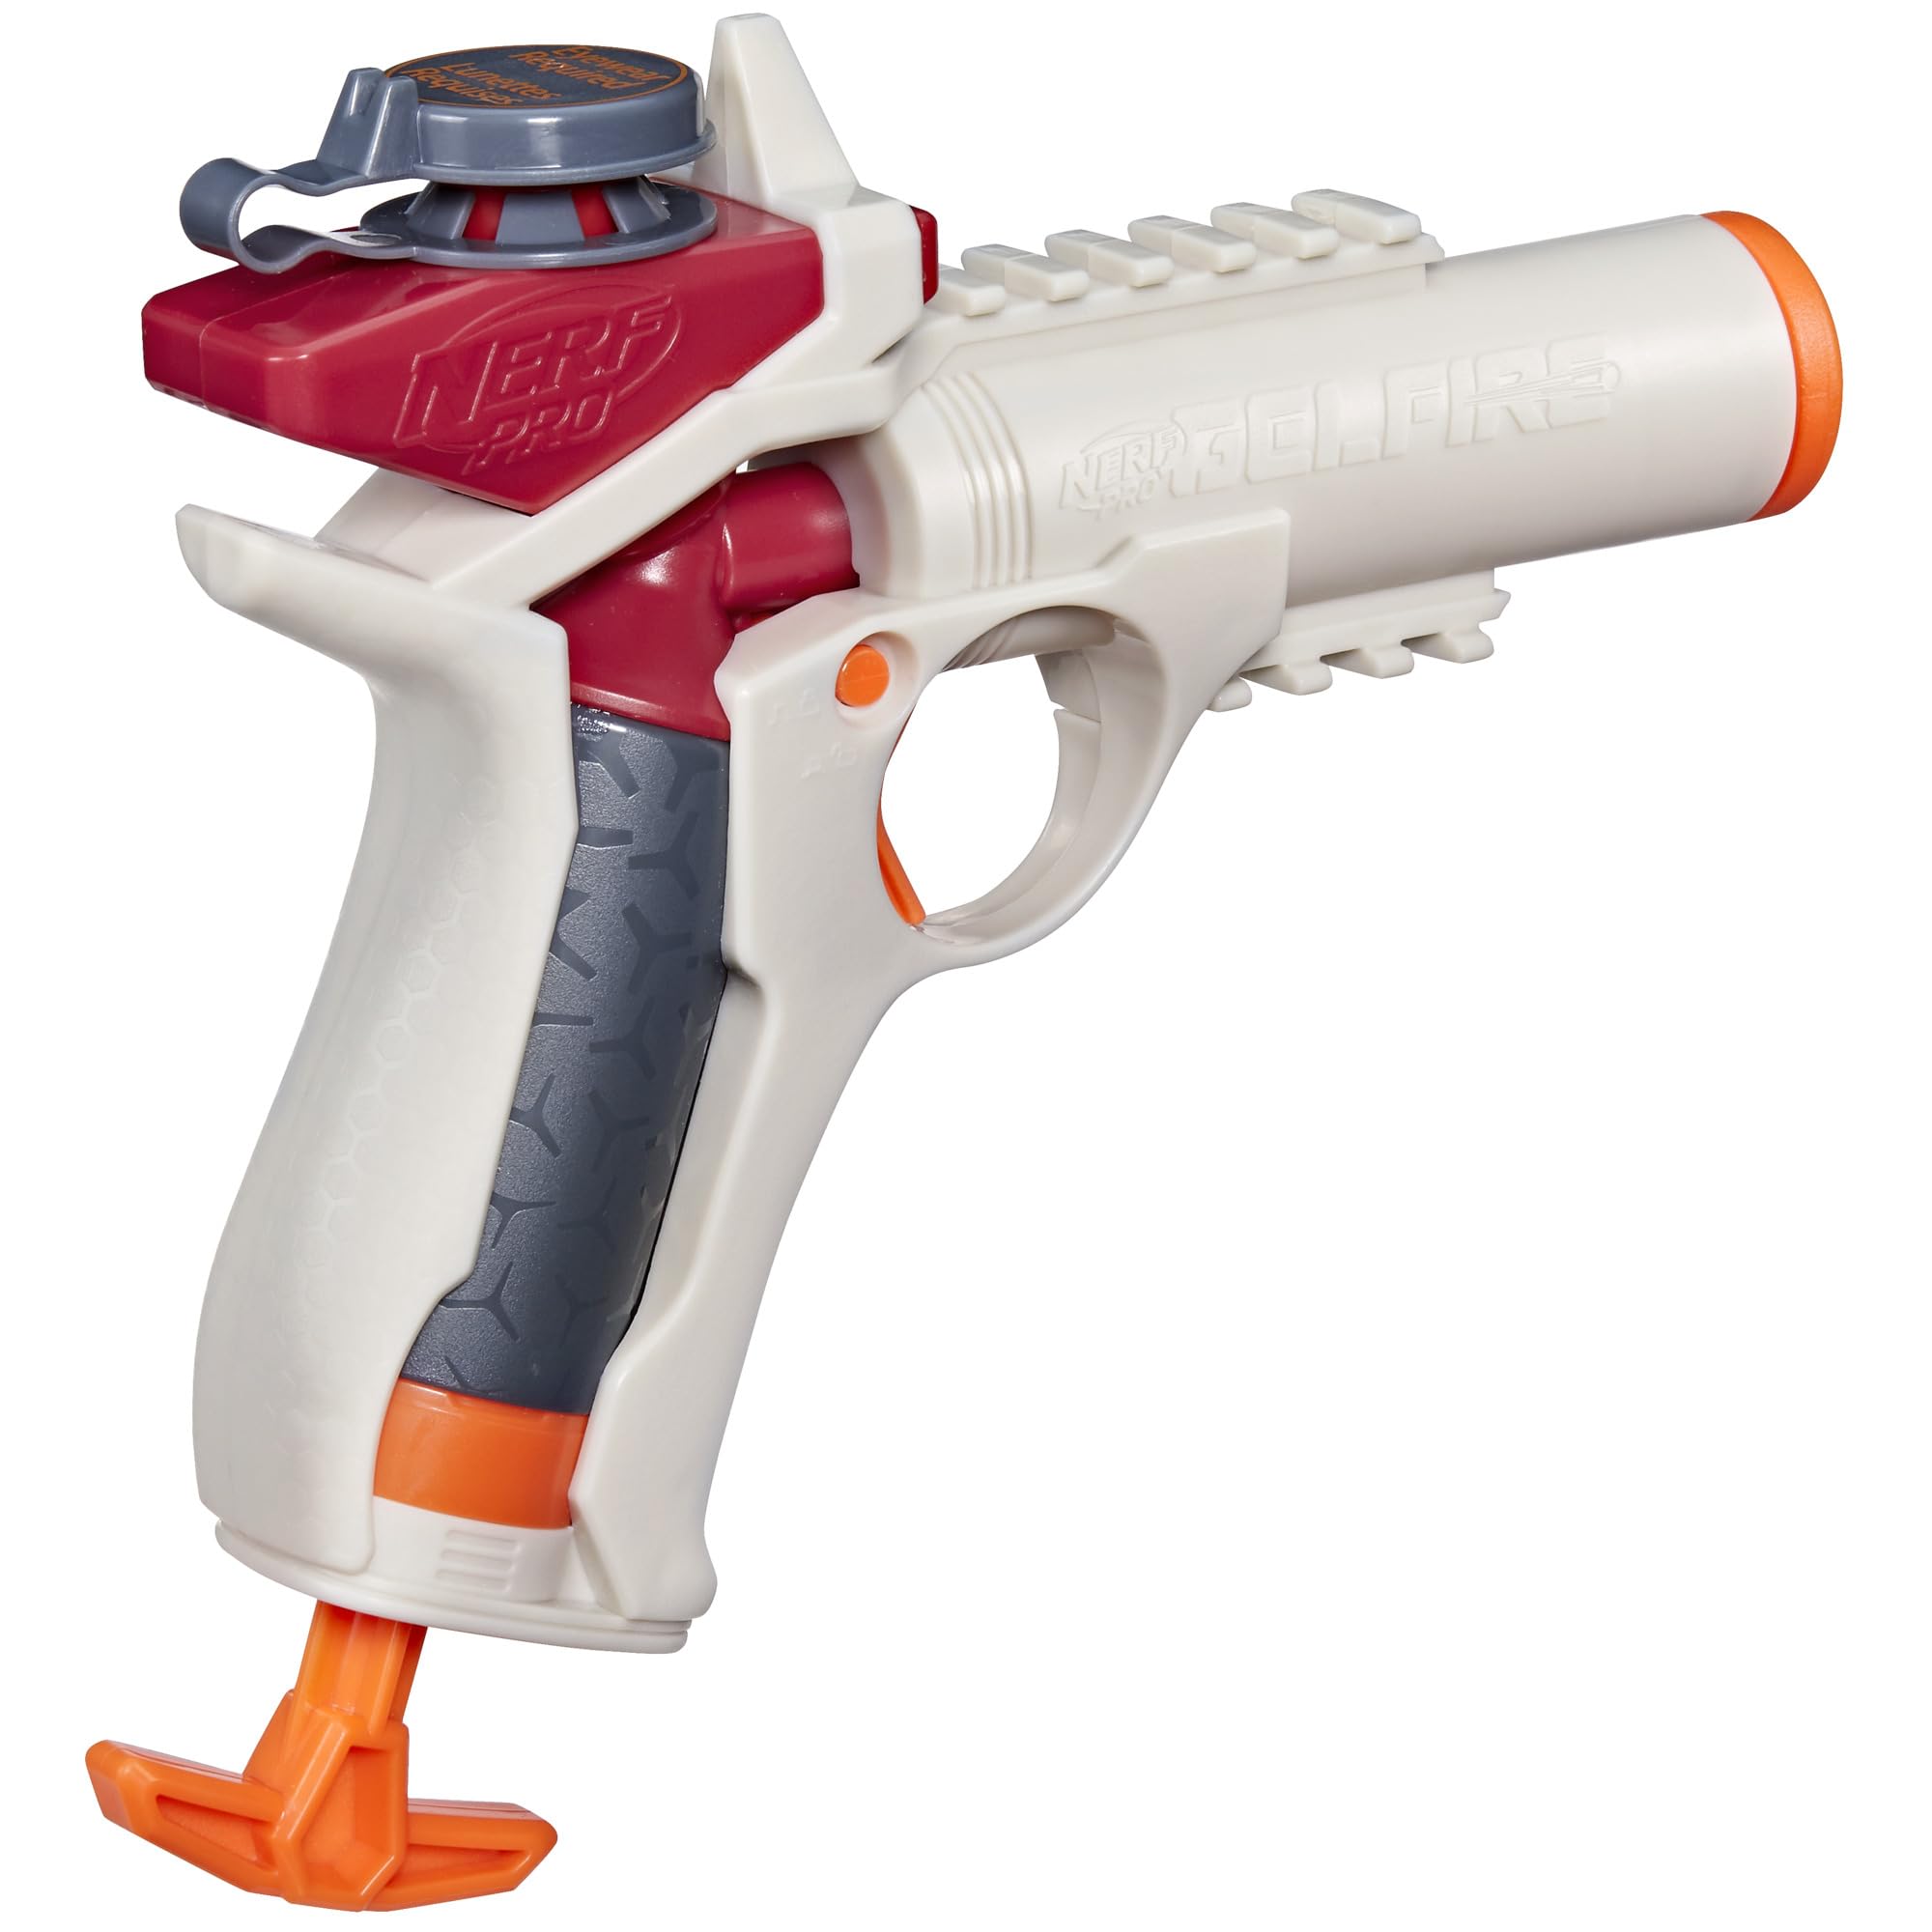 Nerf Pro Gelfire Ignitor Blaster, 1000 Gelfire Rounds, 60 Round Capacity, T-Pull Priming, Up to 150 FPS, Eyewear, Gifts for Teens Ages 14+